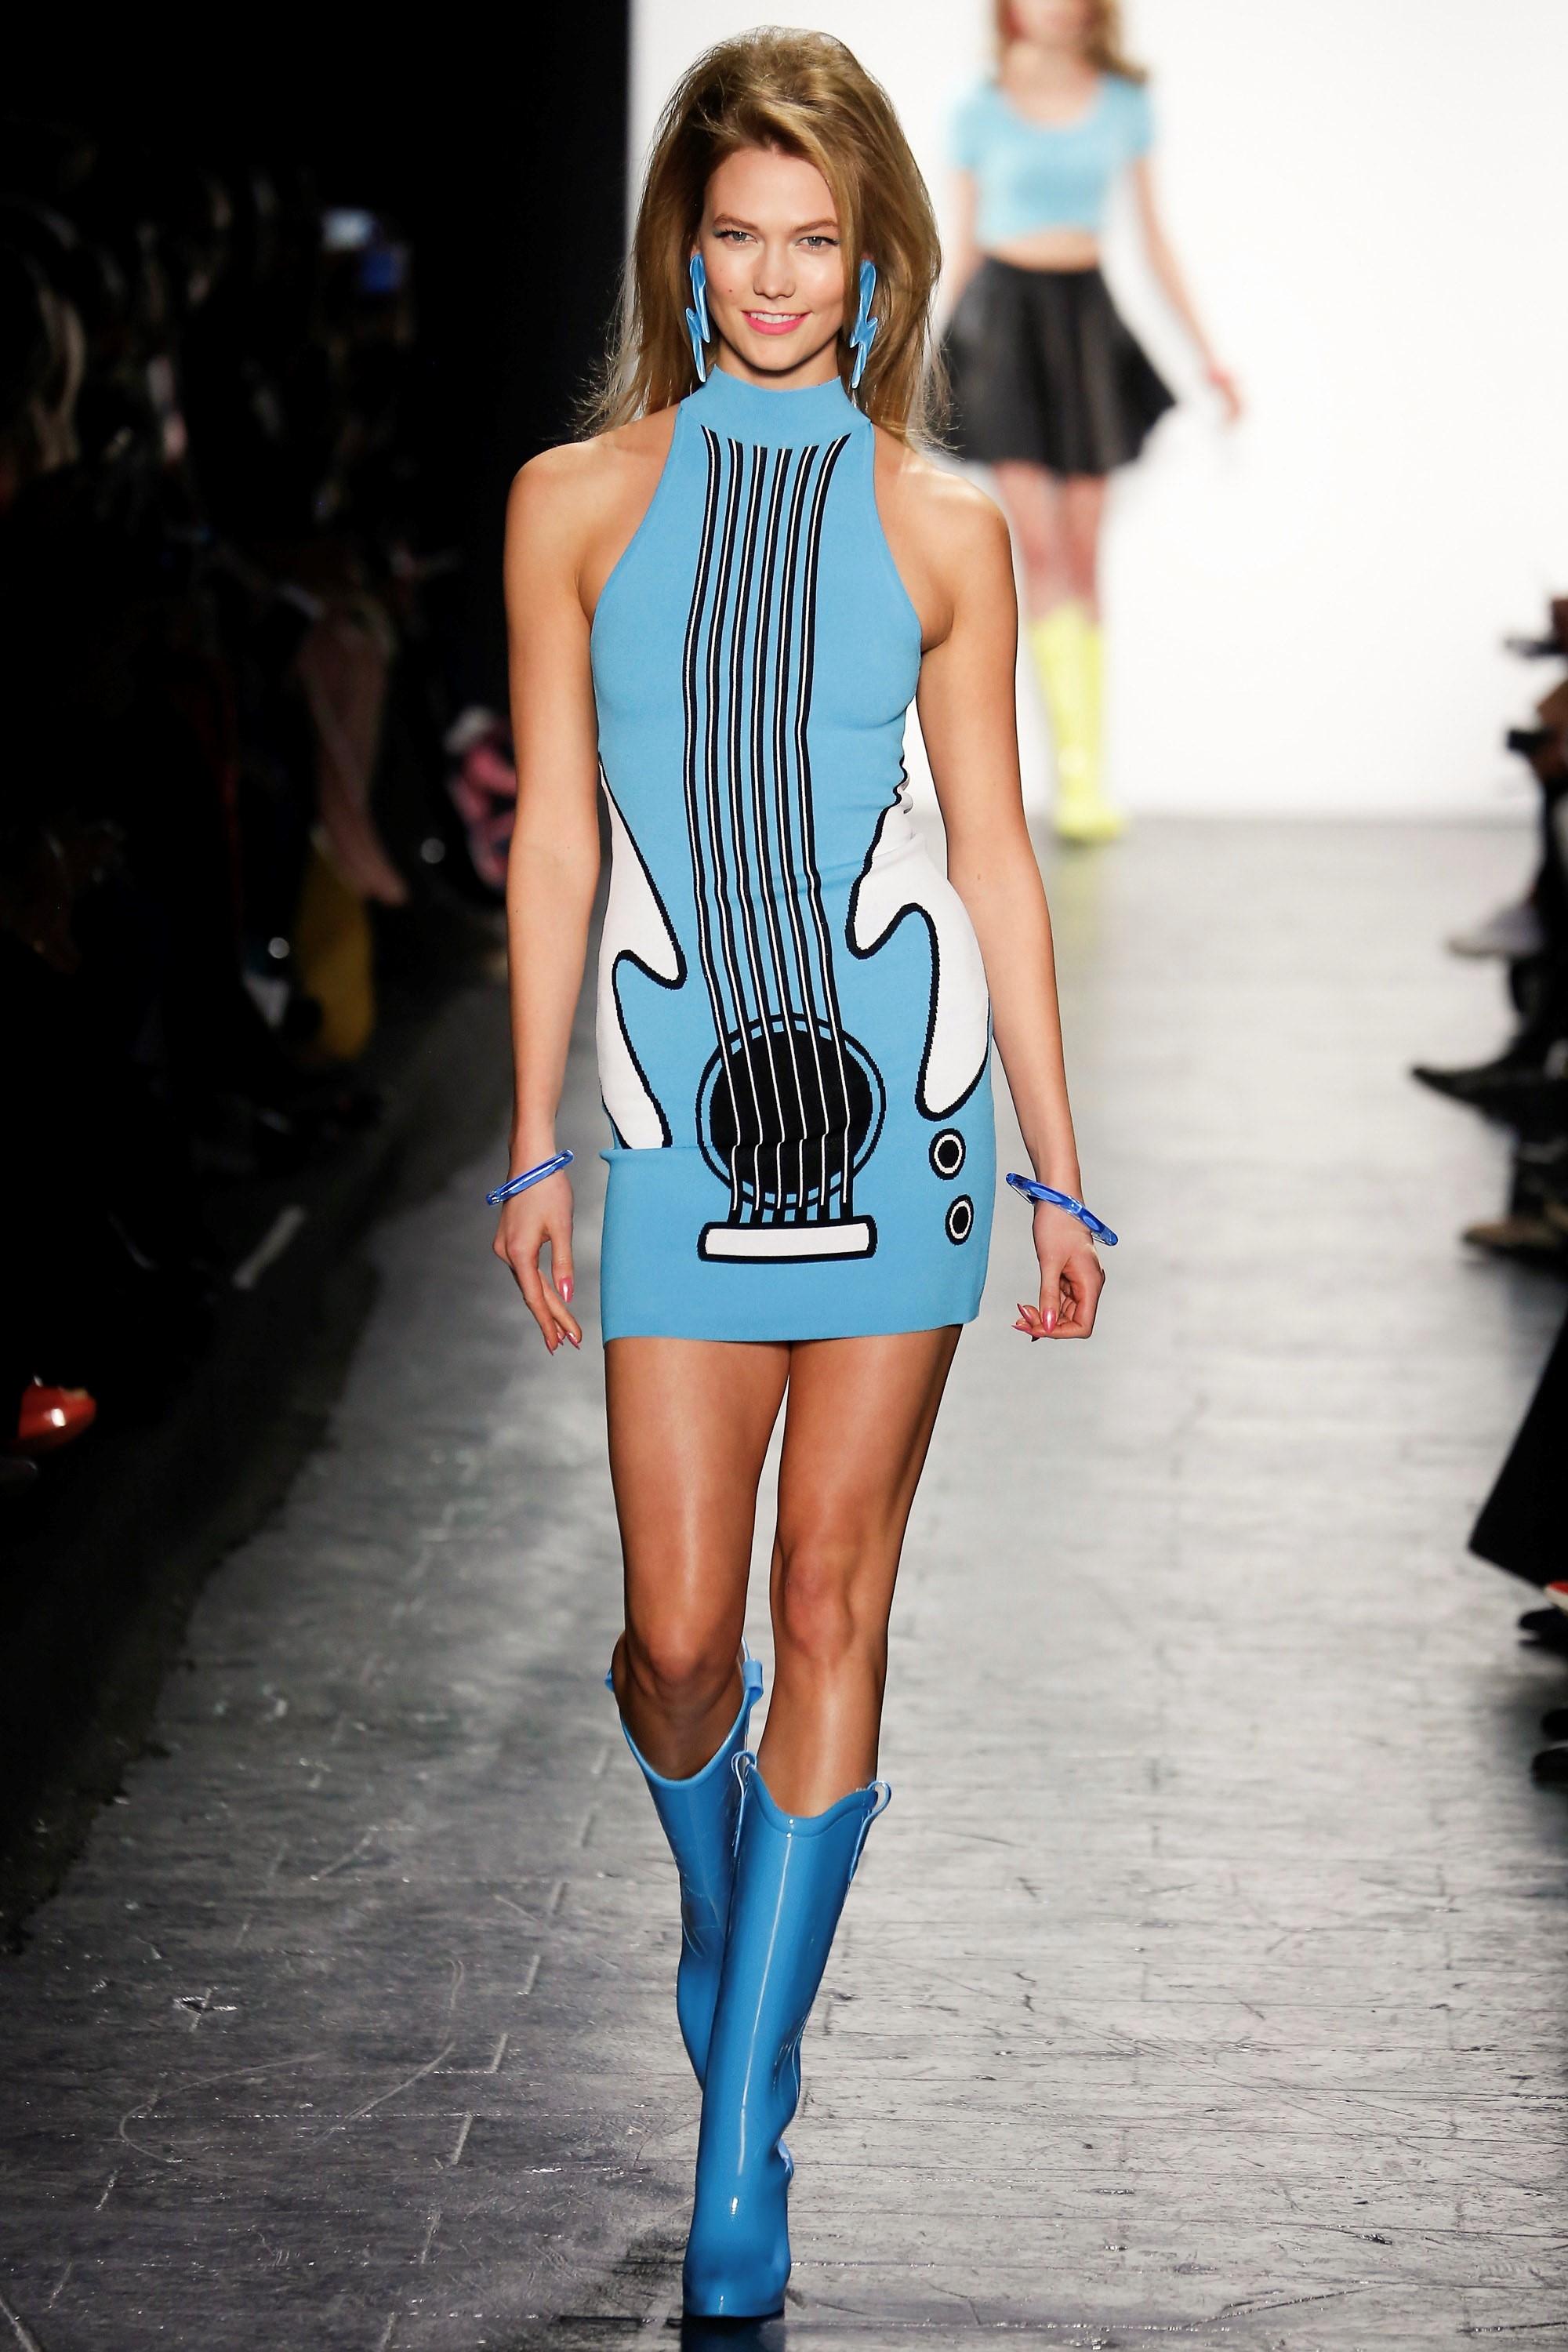 Brand New
Moschino's Jeremy Scott Famous Blue Guitar Dress
Italian Size 44 Bodycon With Plenty of Stretch Available
Runway F/W 2016
Seen on Katy Perry
$990

COMPOSITION
75% Rayon, 25% Polyamide
Made in Italy